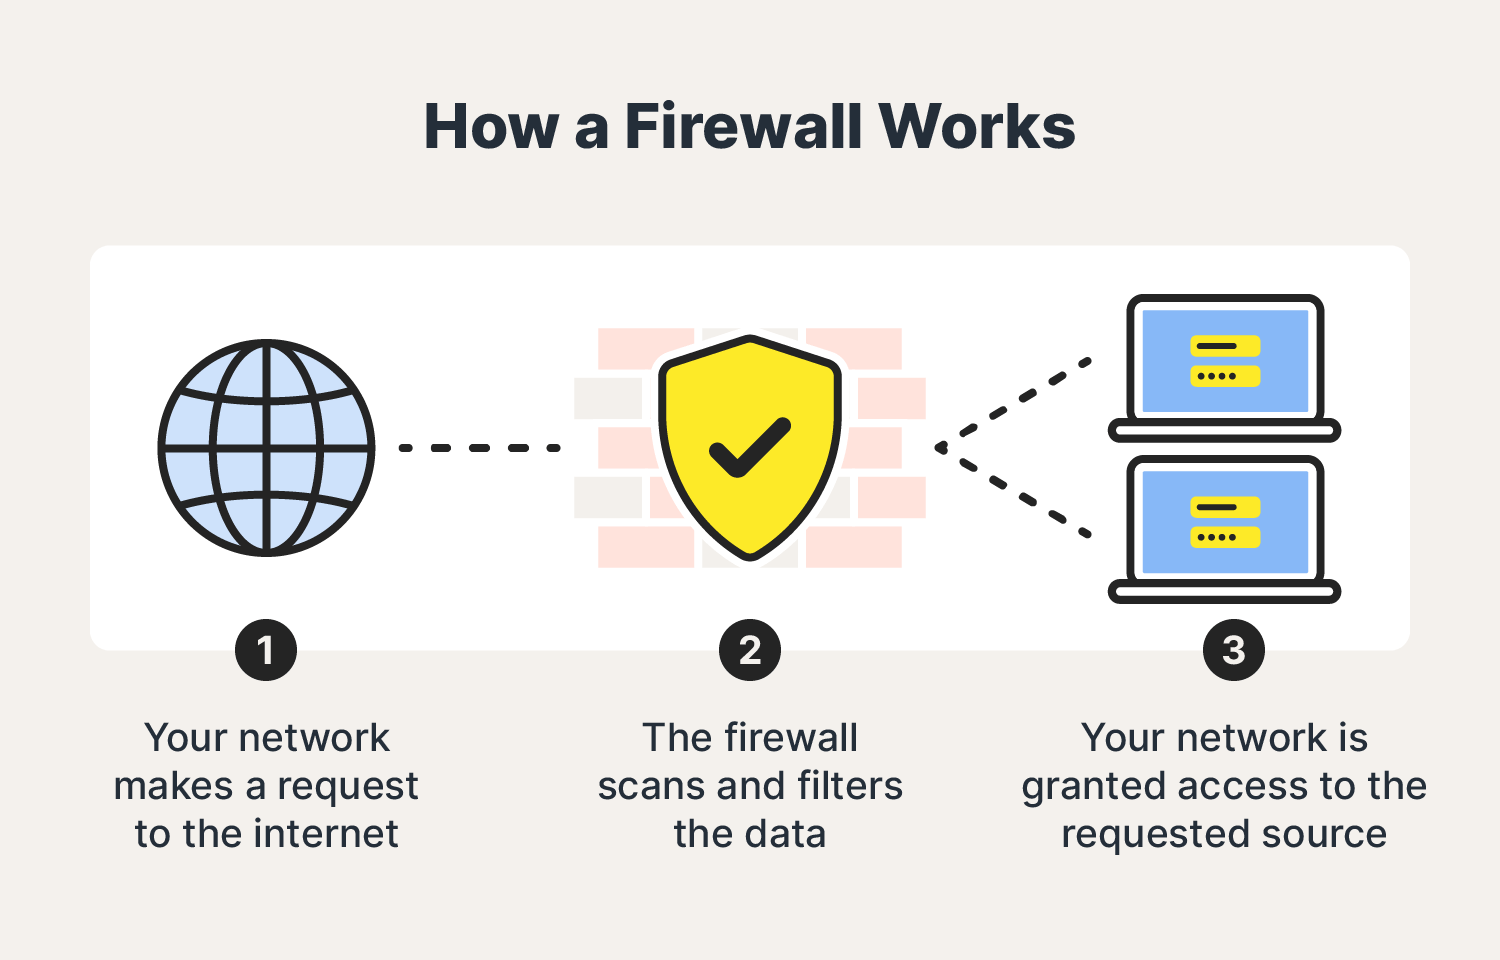 An image shows how a firewall works.